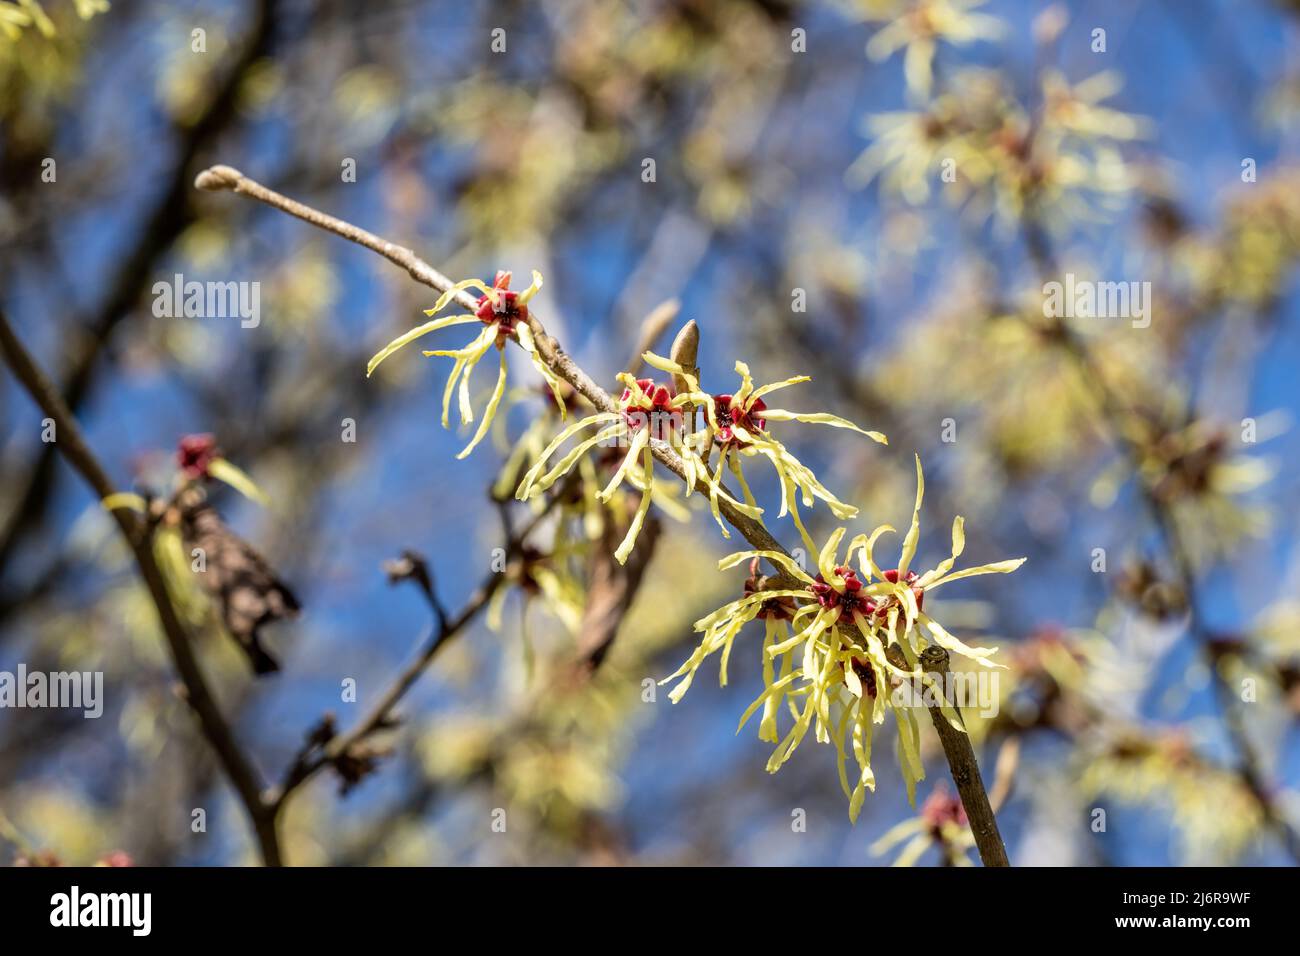 selective focus on one branch of a yellow spidery flowered tree like bush called witch hazel or hamamelis x intermedia Stock Photo